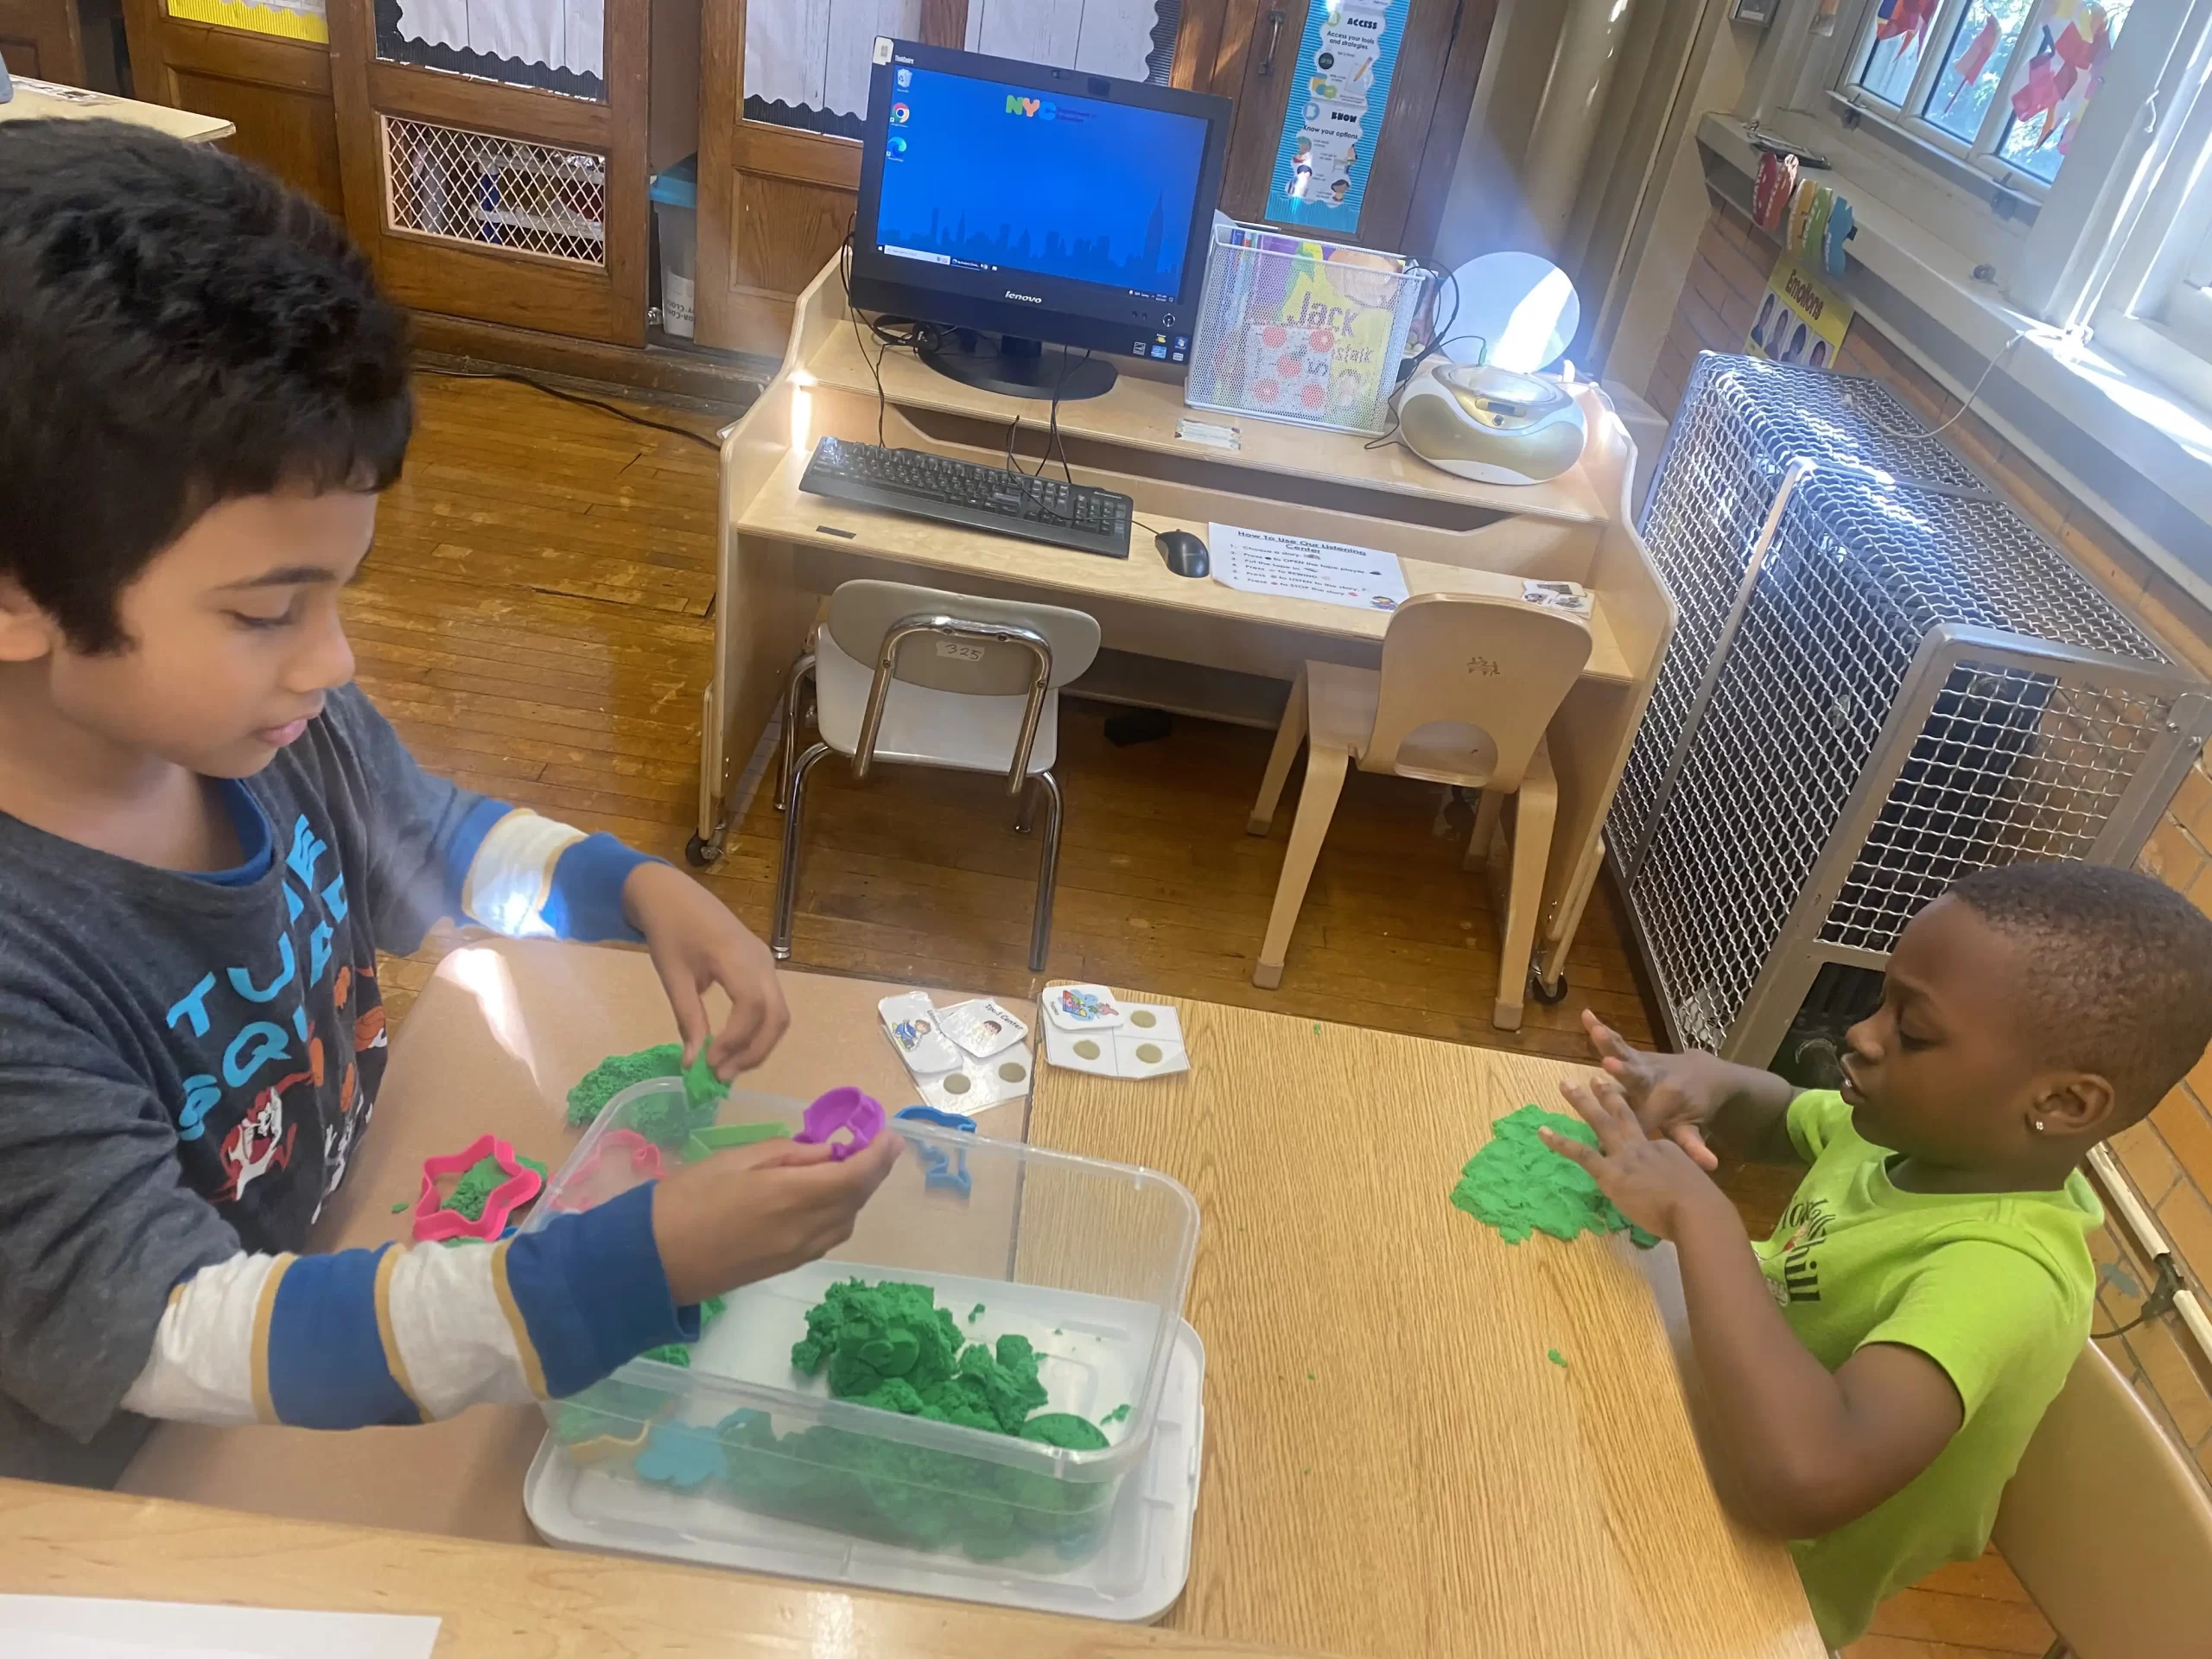 One boy with a blue shirt and a boy with a green shirt using play dough to learn shapes.